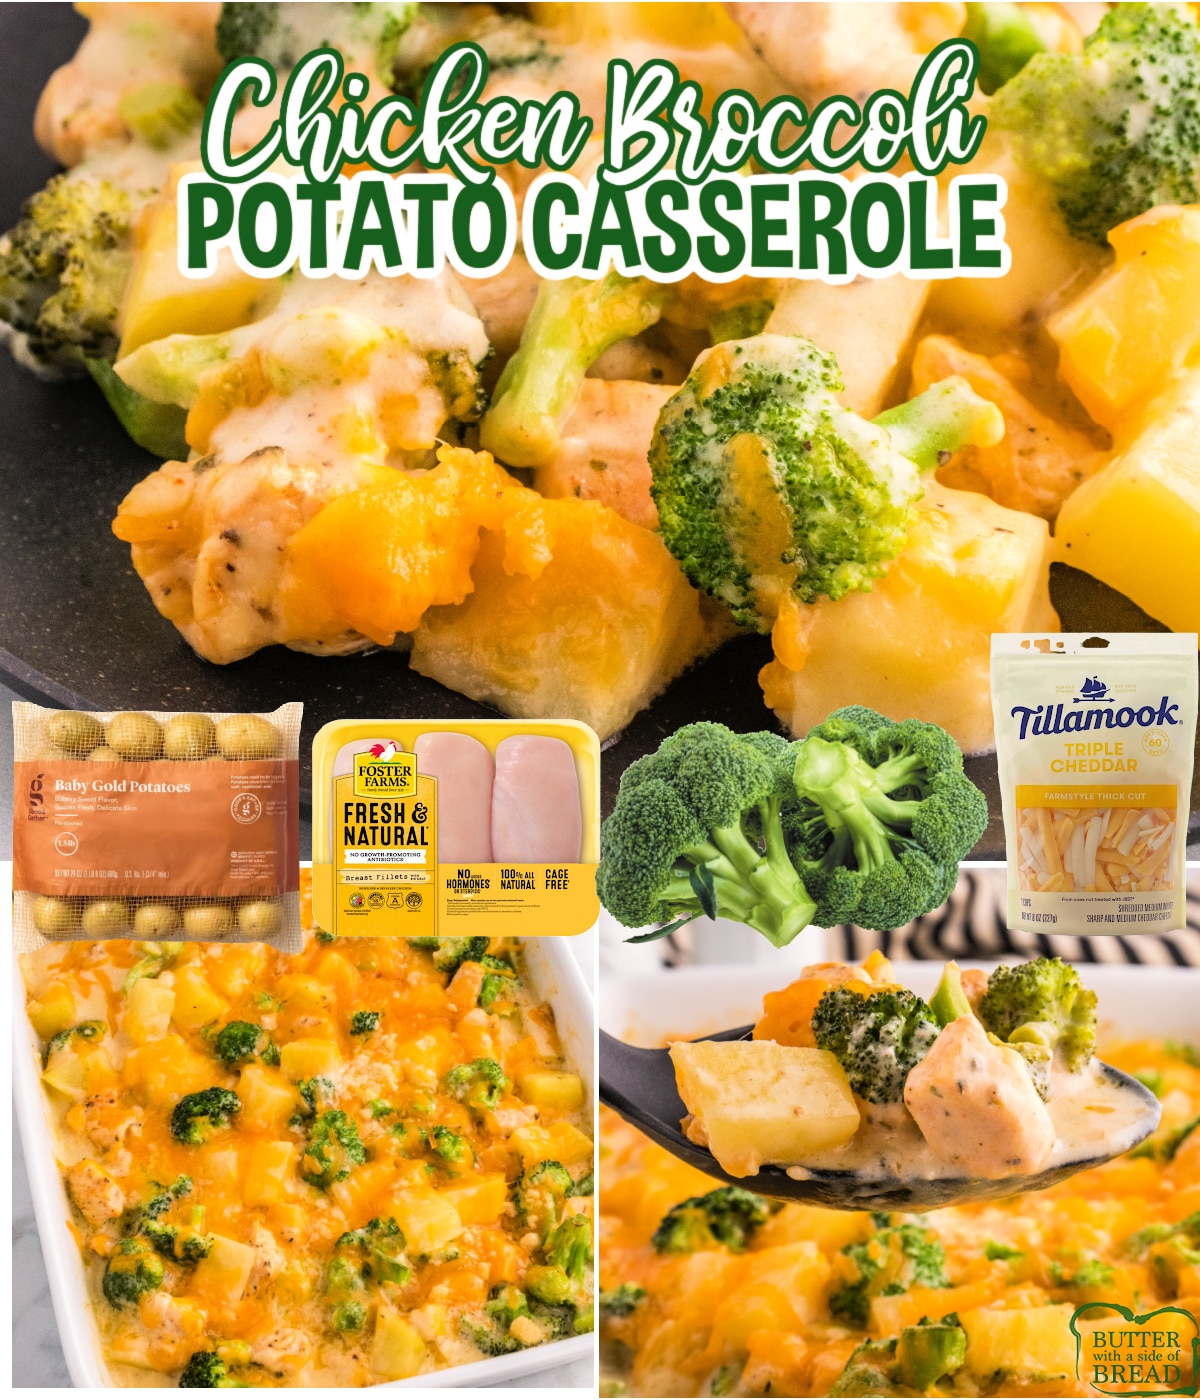 Chicken Broccoli Potato Casserole is a simple and delicious weeknight dinner recipe that the whole family will love. This chicken casserole is loaded with potatoes, broccoli, and cheese. 